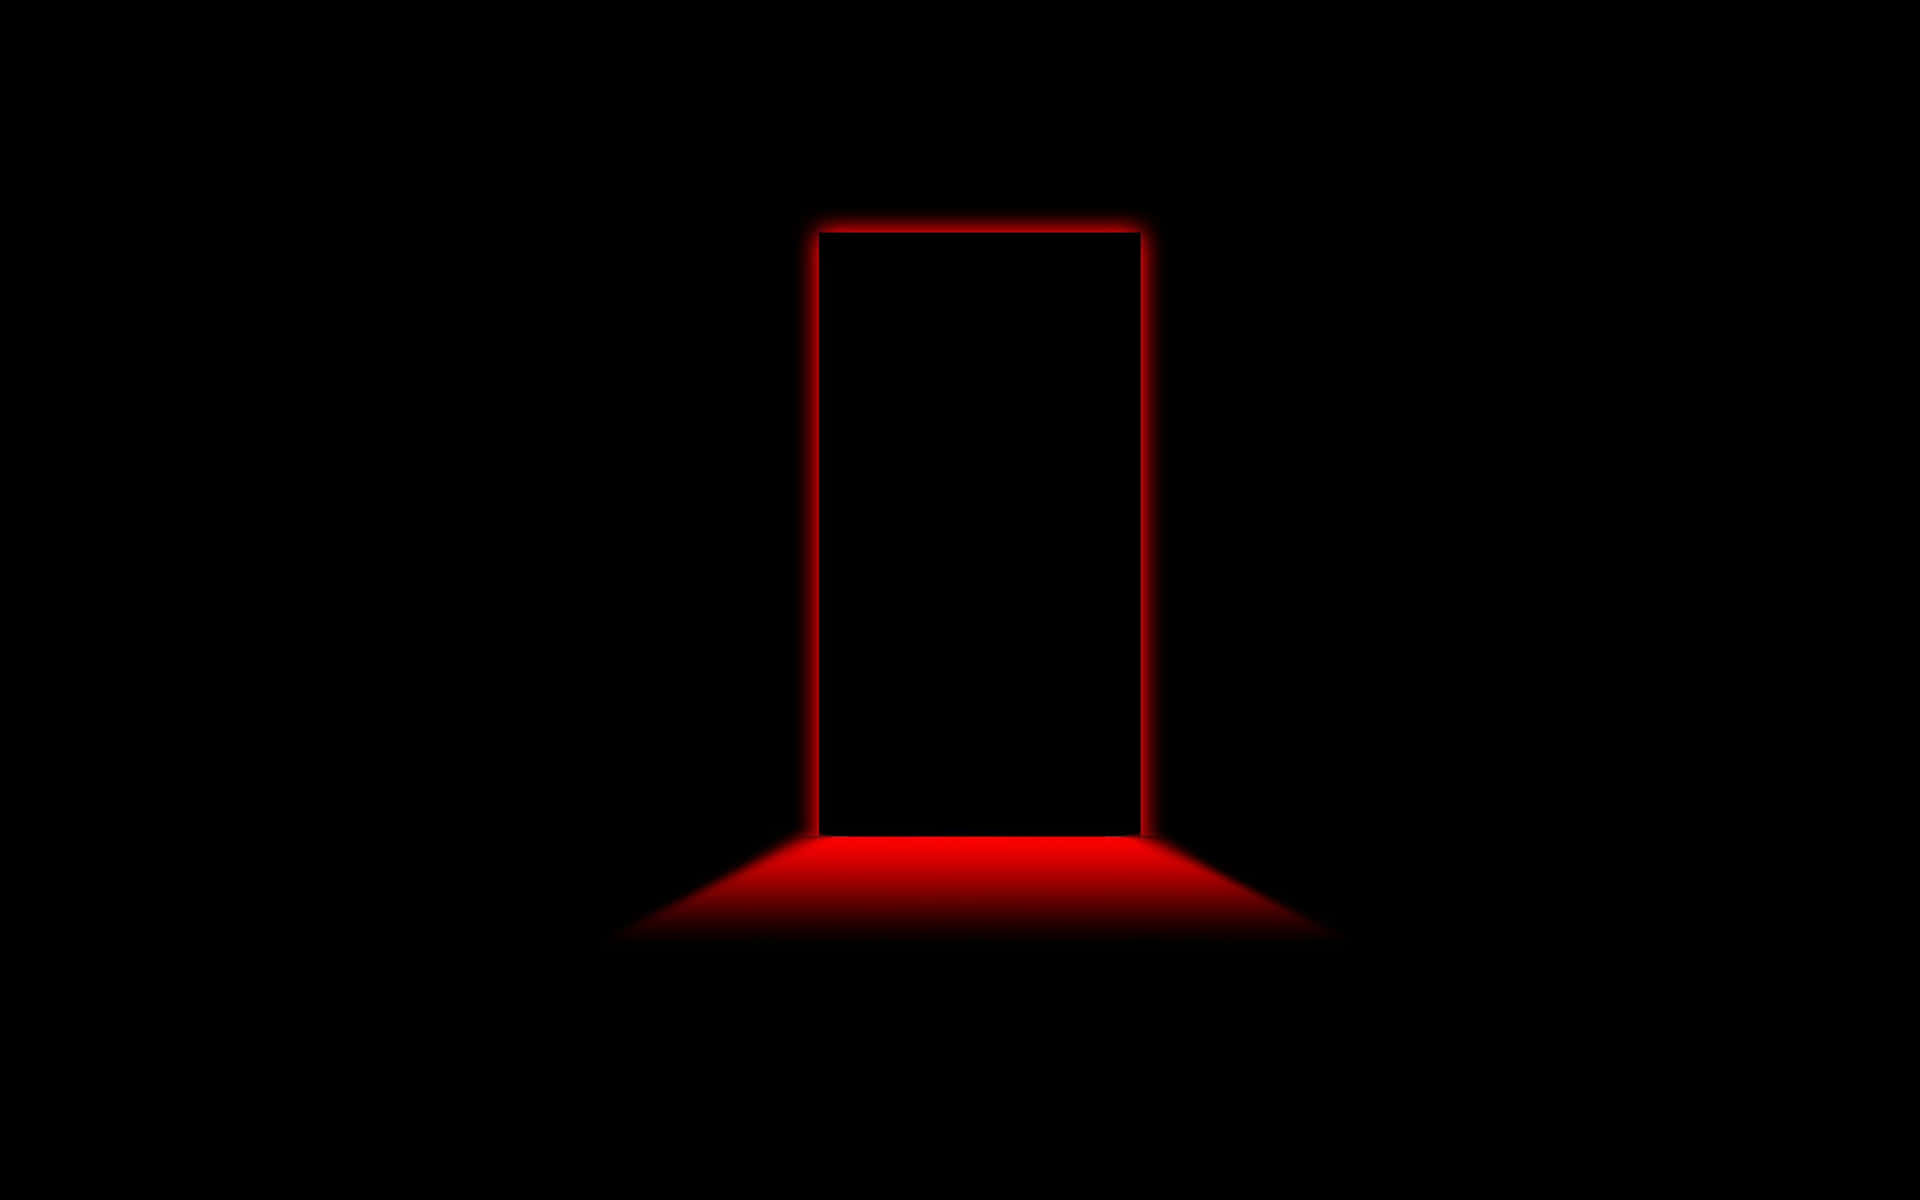 A Red Door With A Light Shining Through It